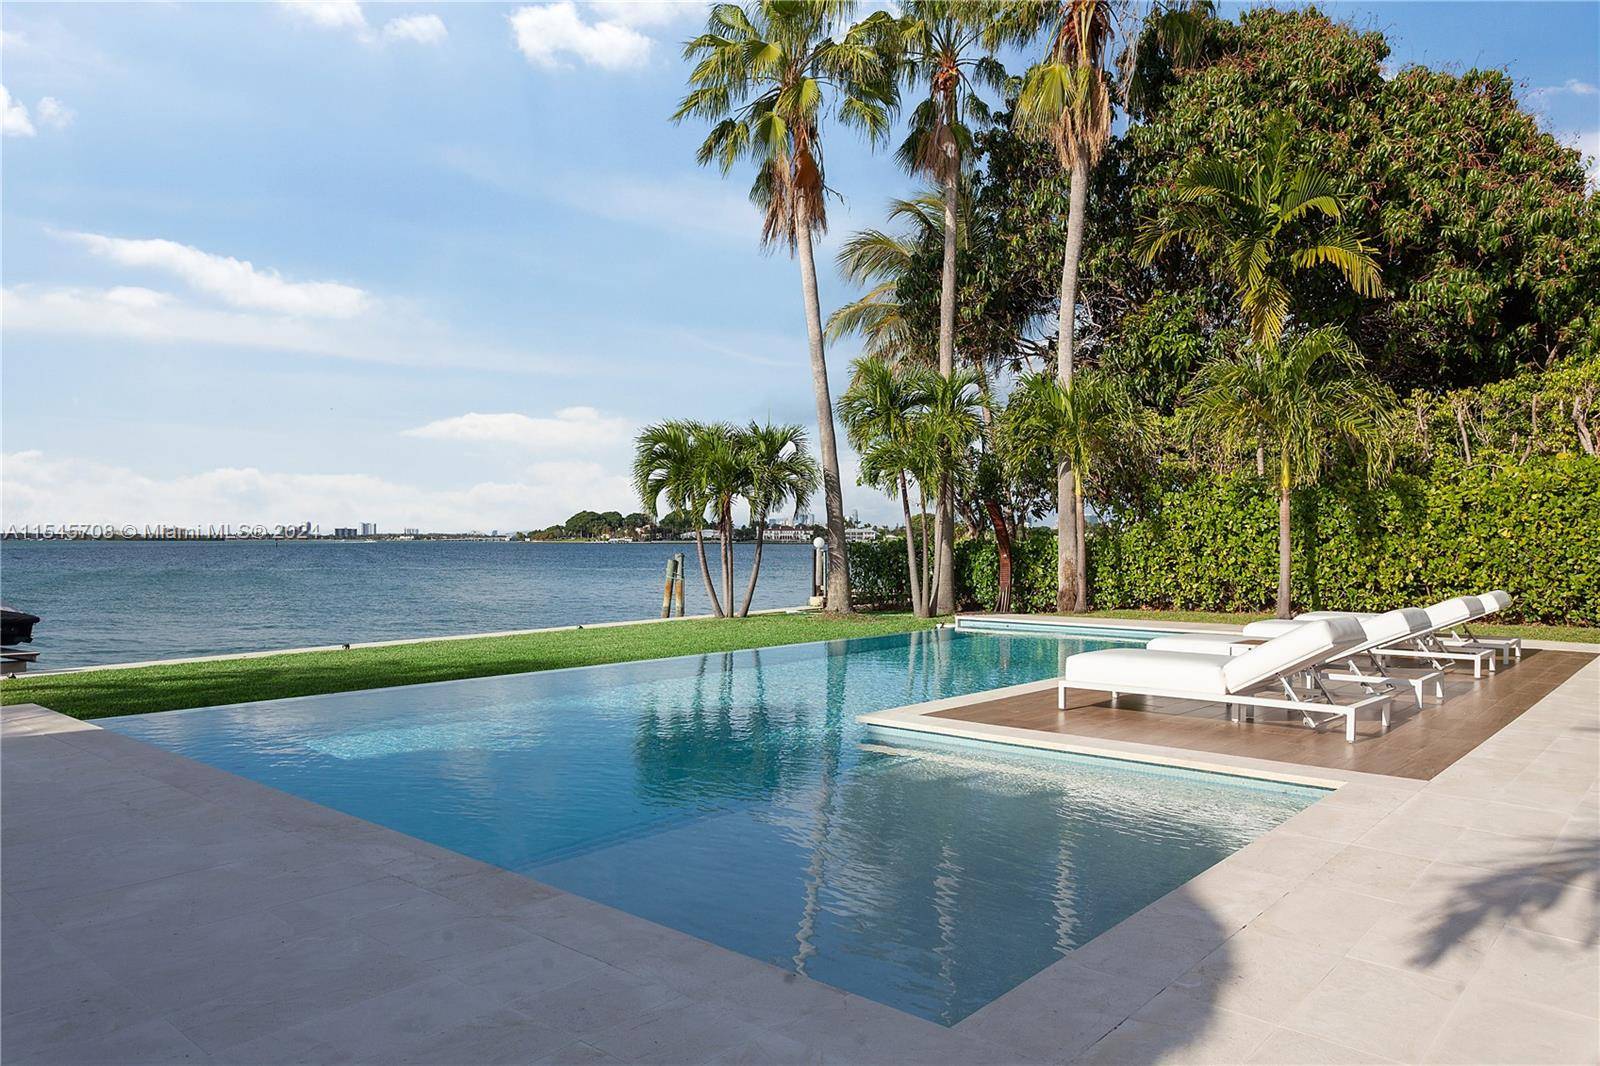 Experience the most incredible open bay views that Miami Beach has to offer.